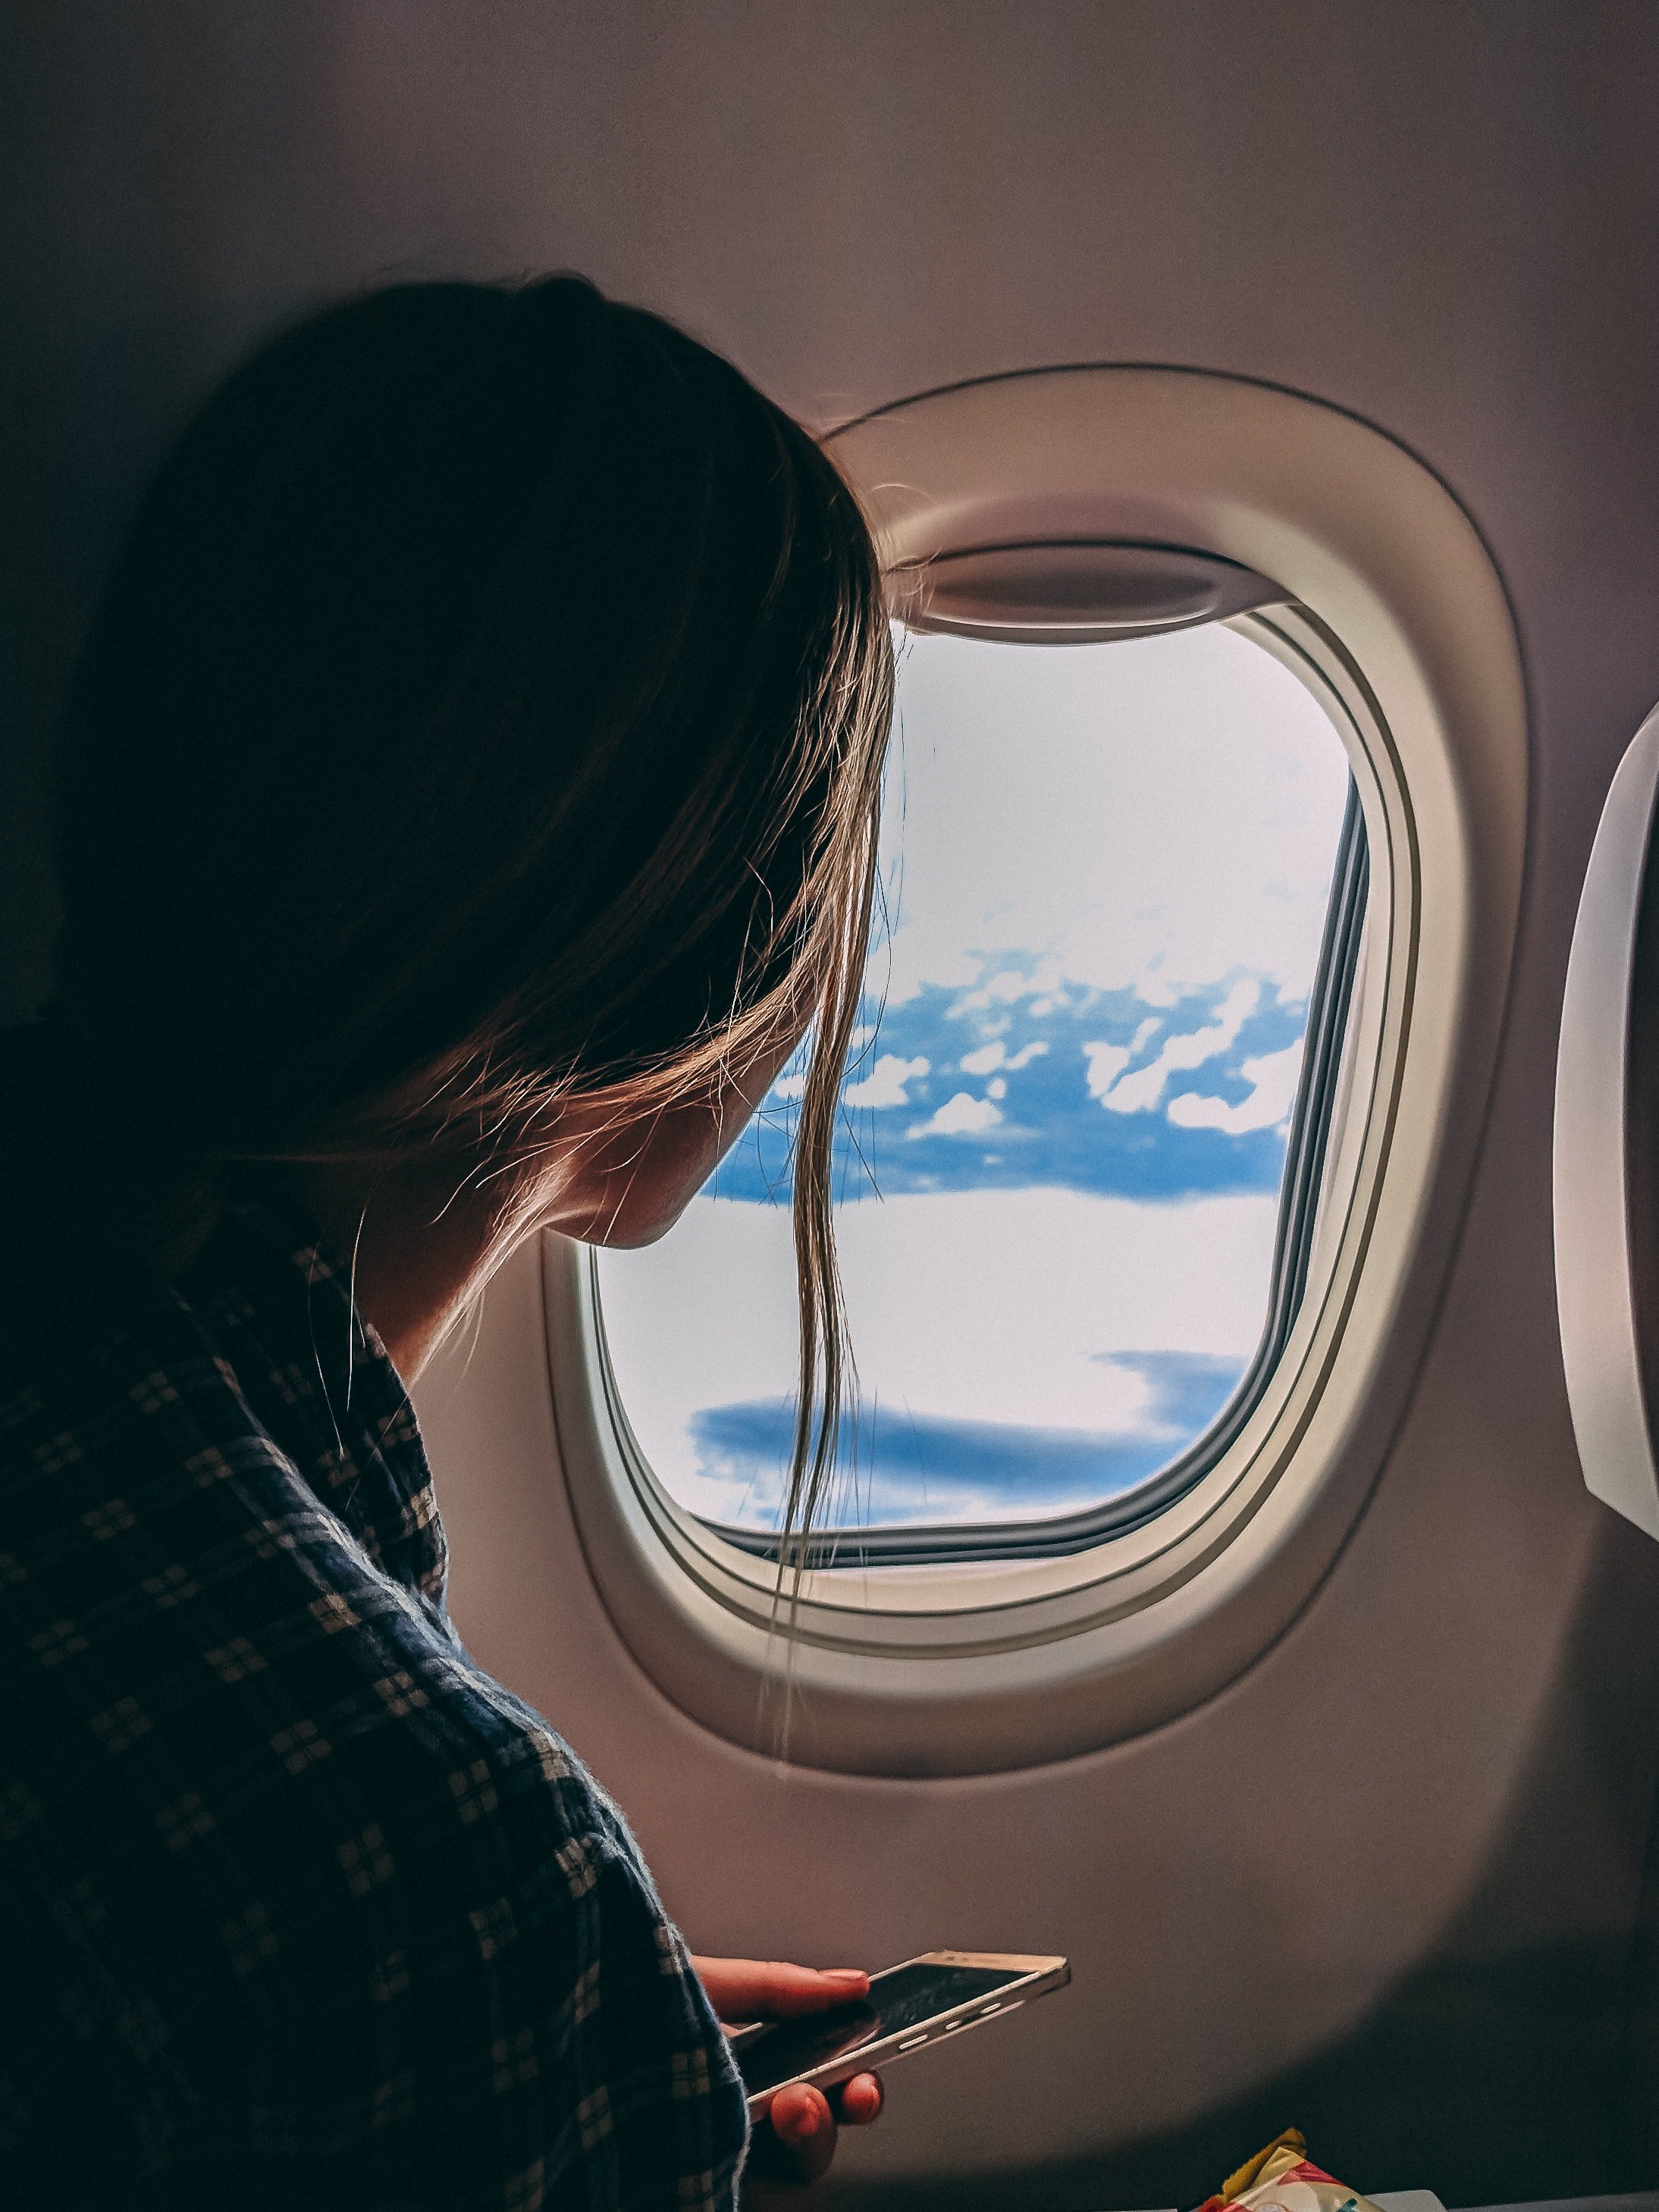 Lady looking out the plane window | Photo: Pexels